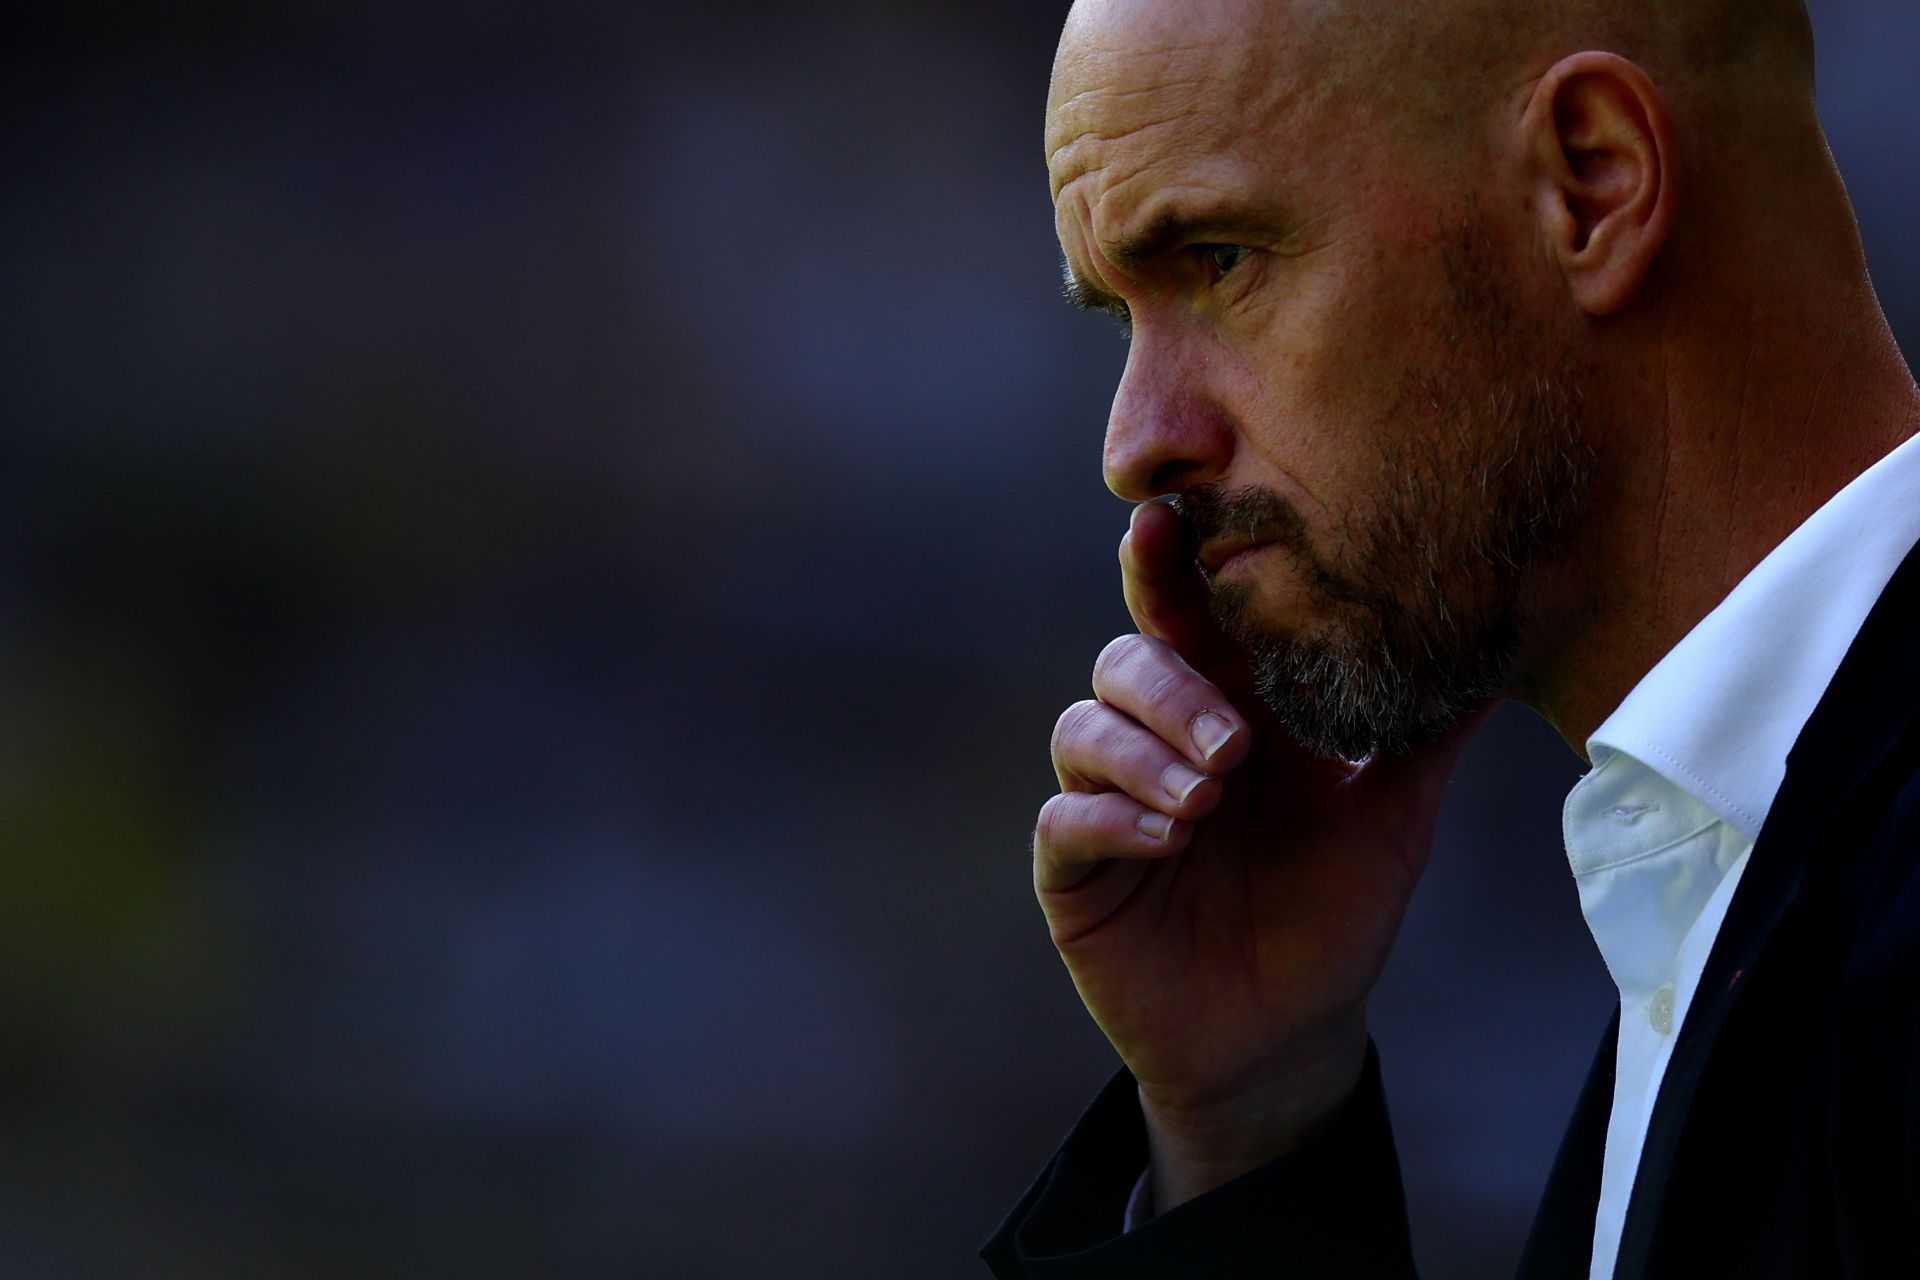 Erik Ten Hag has many current issues to solve at Manchester United.